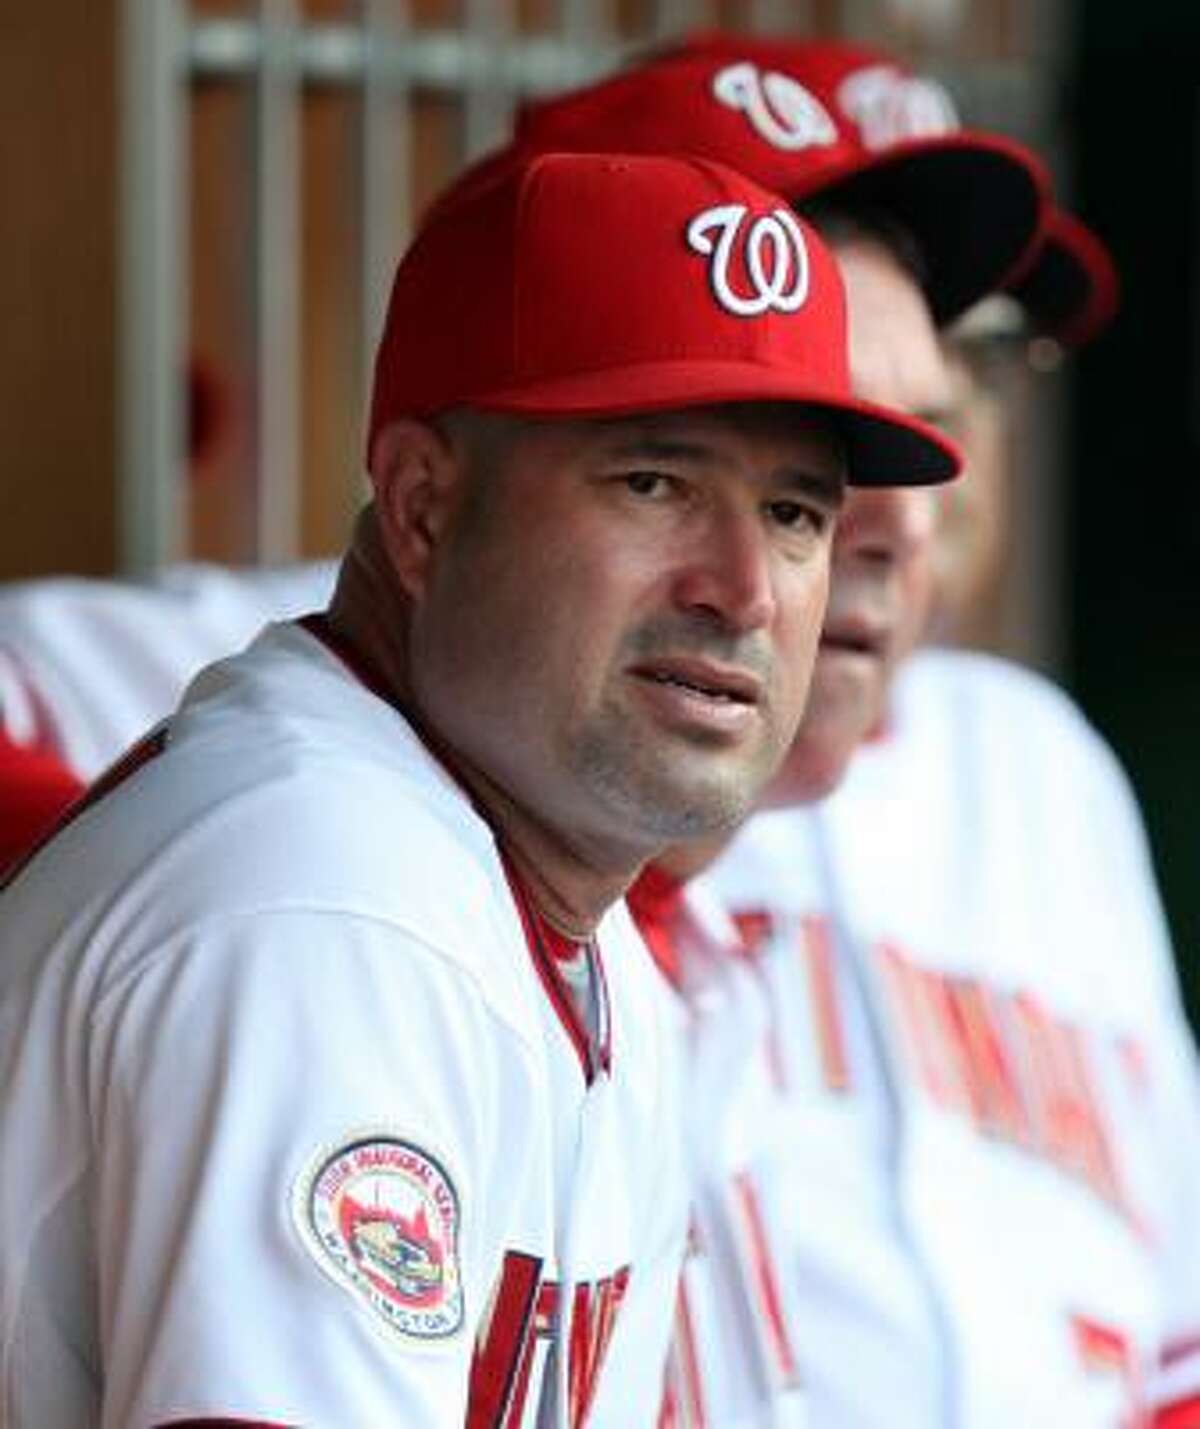 Manny Acta Age: 40 Who he is: Former Nationals manager. Quick fact: Signed by Astros at 17 as infielder, went 158-252 in D.C.